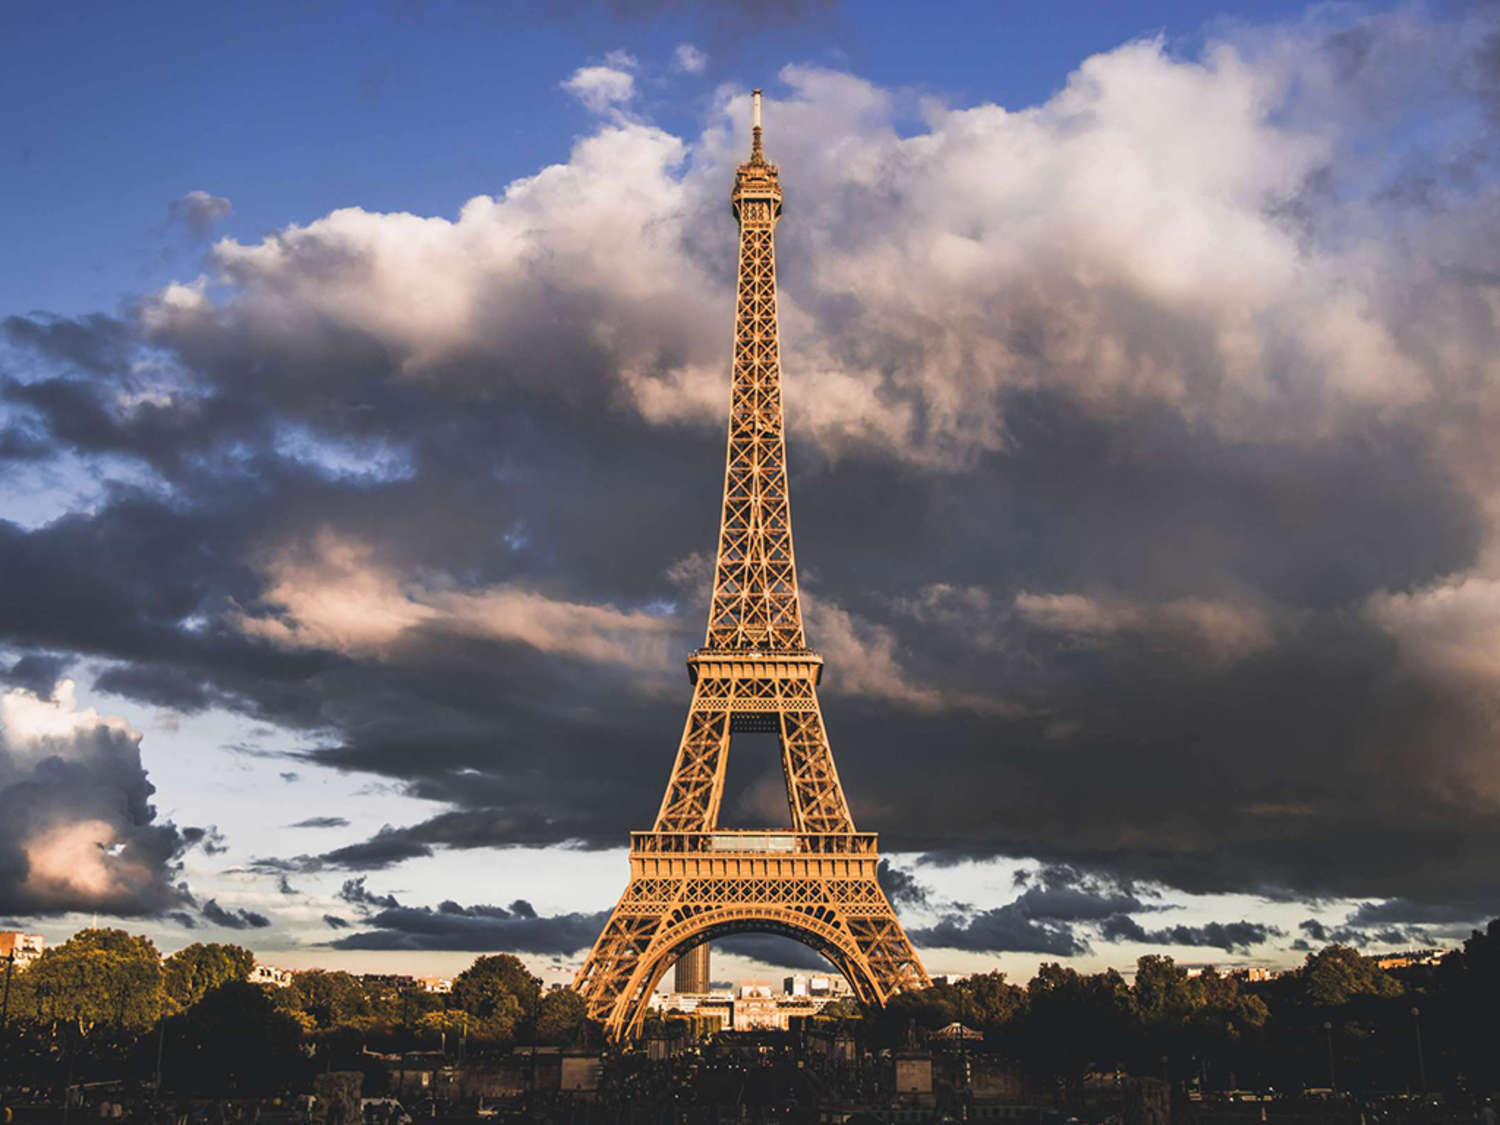 4. Materials Used in Building the Eiffel Tower